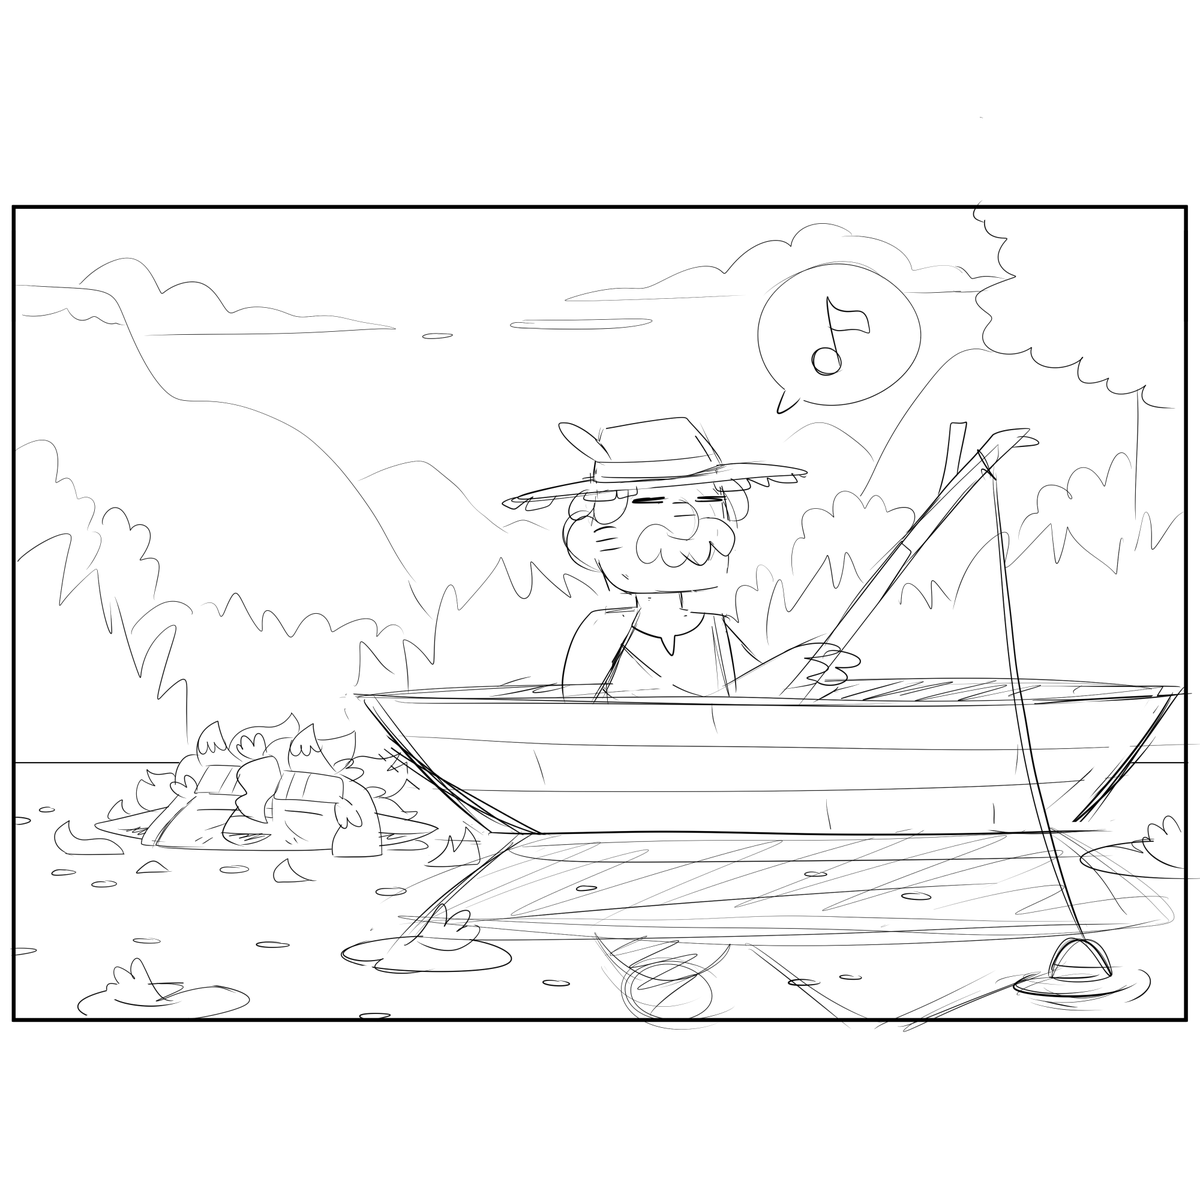 Small comic on its way!

Mister fisherman is up for a surprise. 